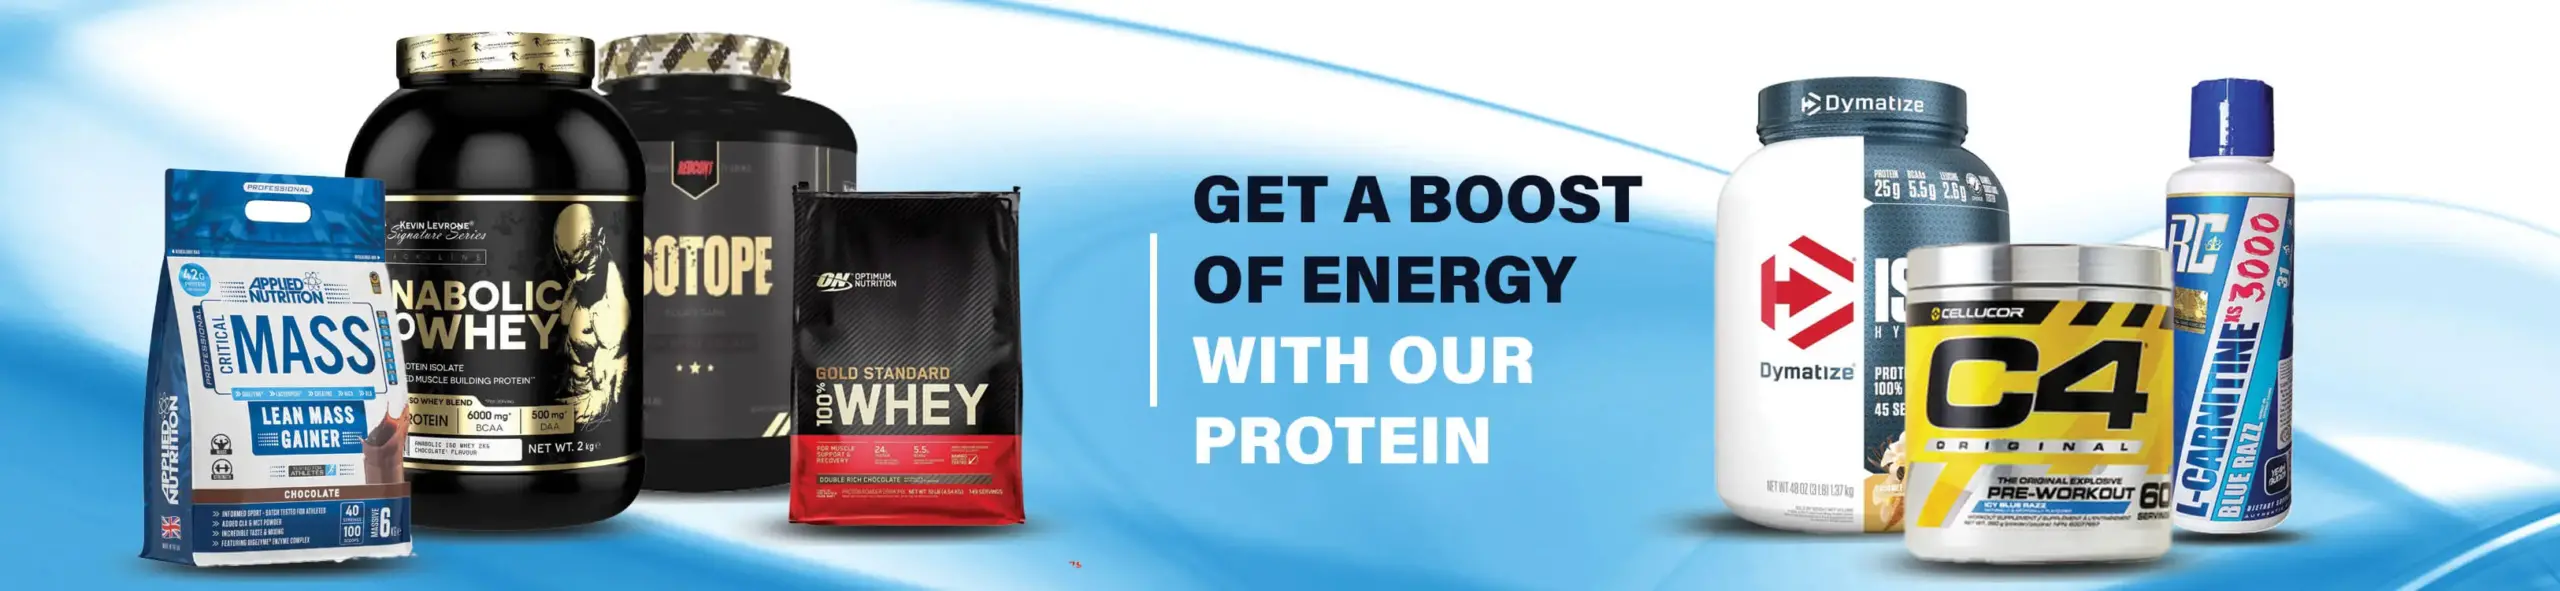 Dubai Top Protein Supplements for Enhanced Fitness Results